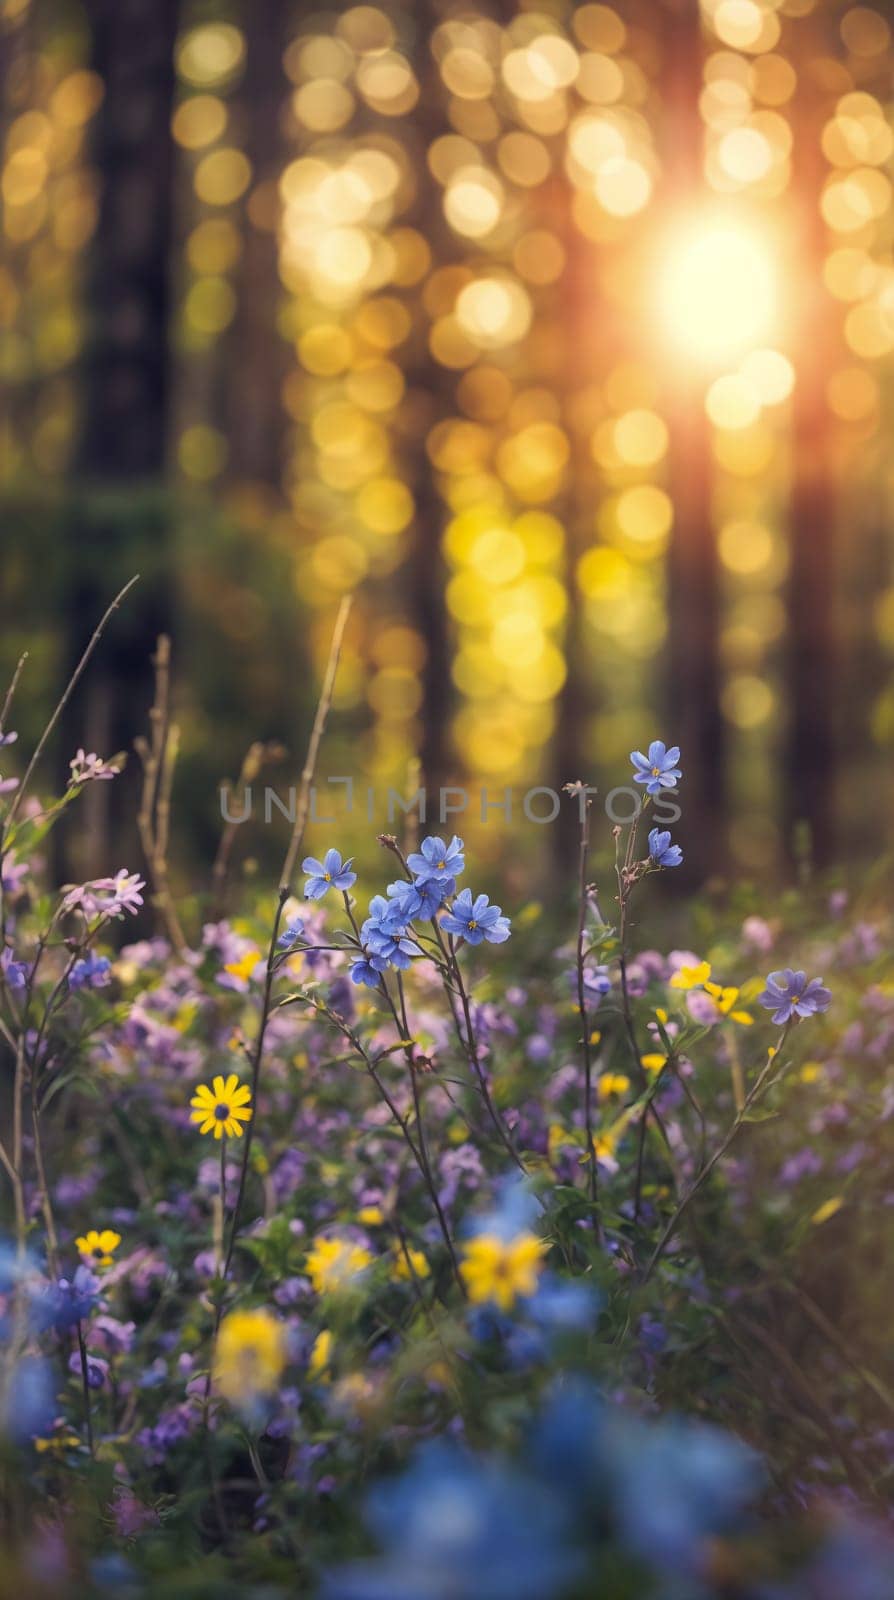 A picturesque field bursting with a profusion of blue and yellow flowers, creating a vibrant scene.